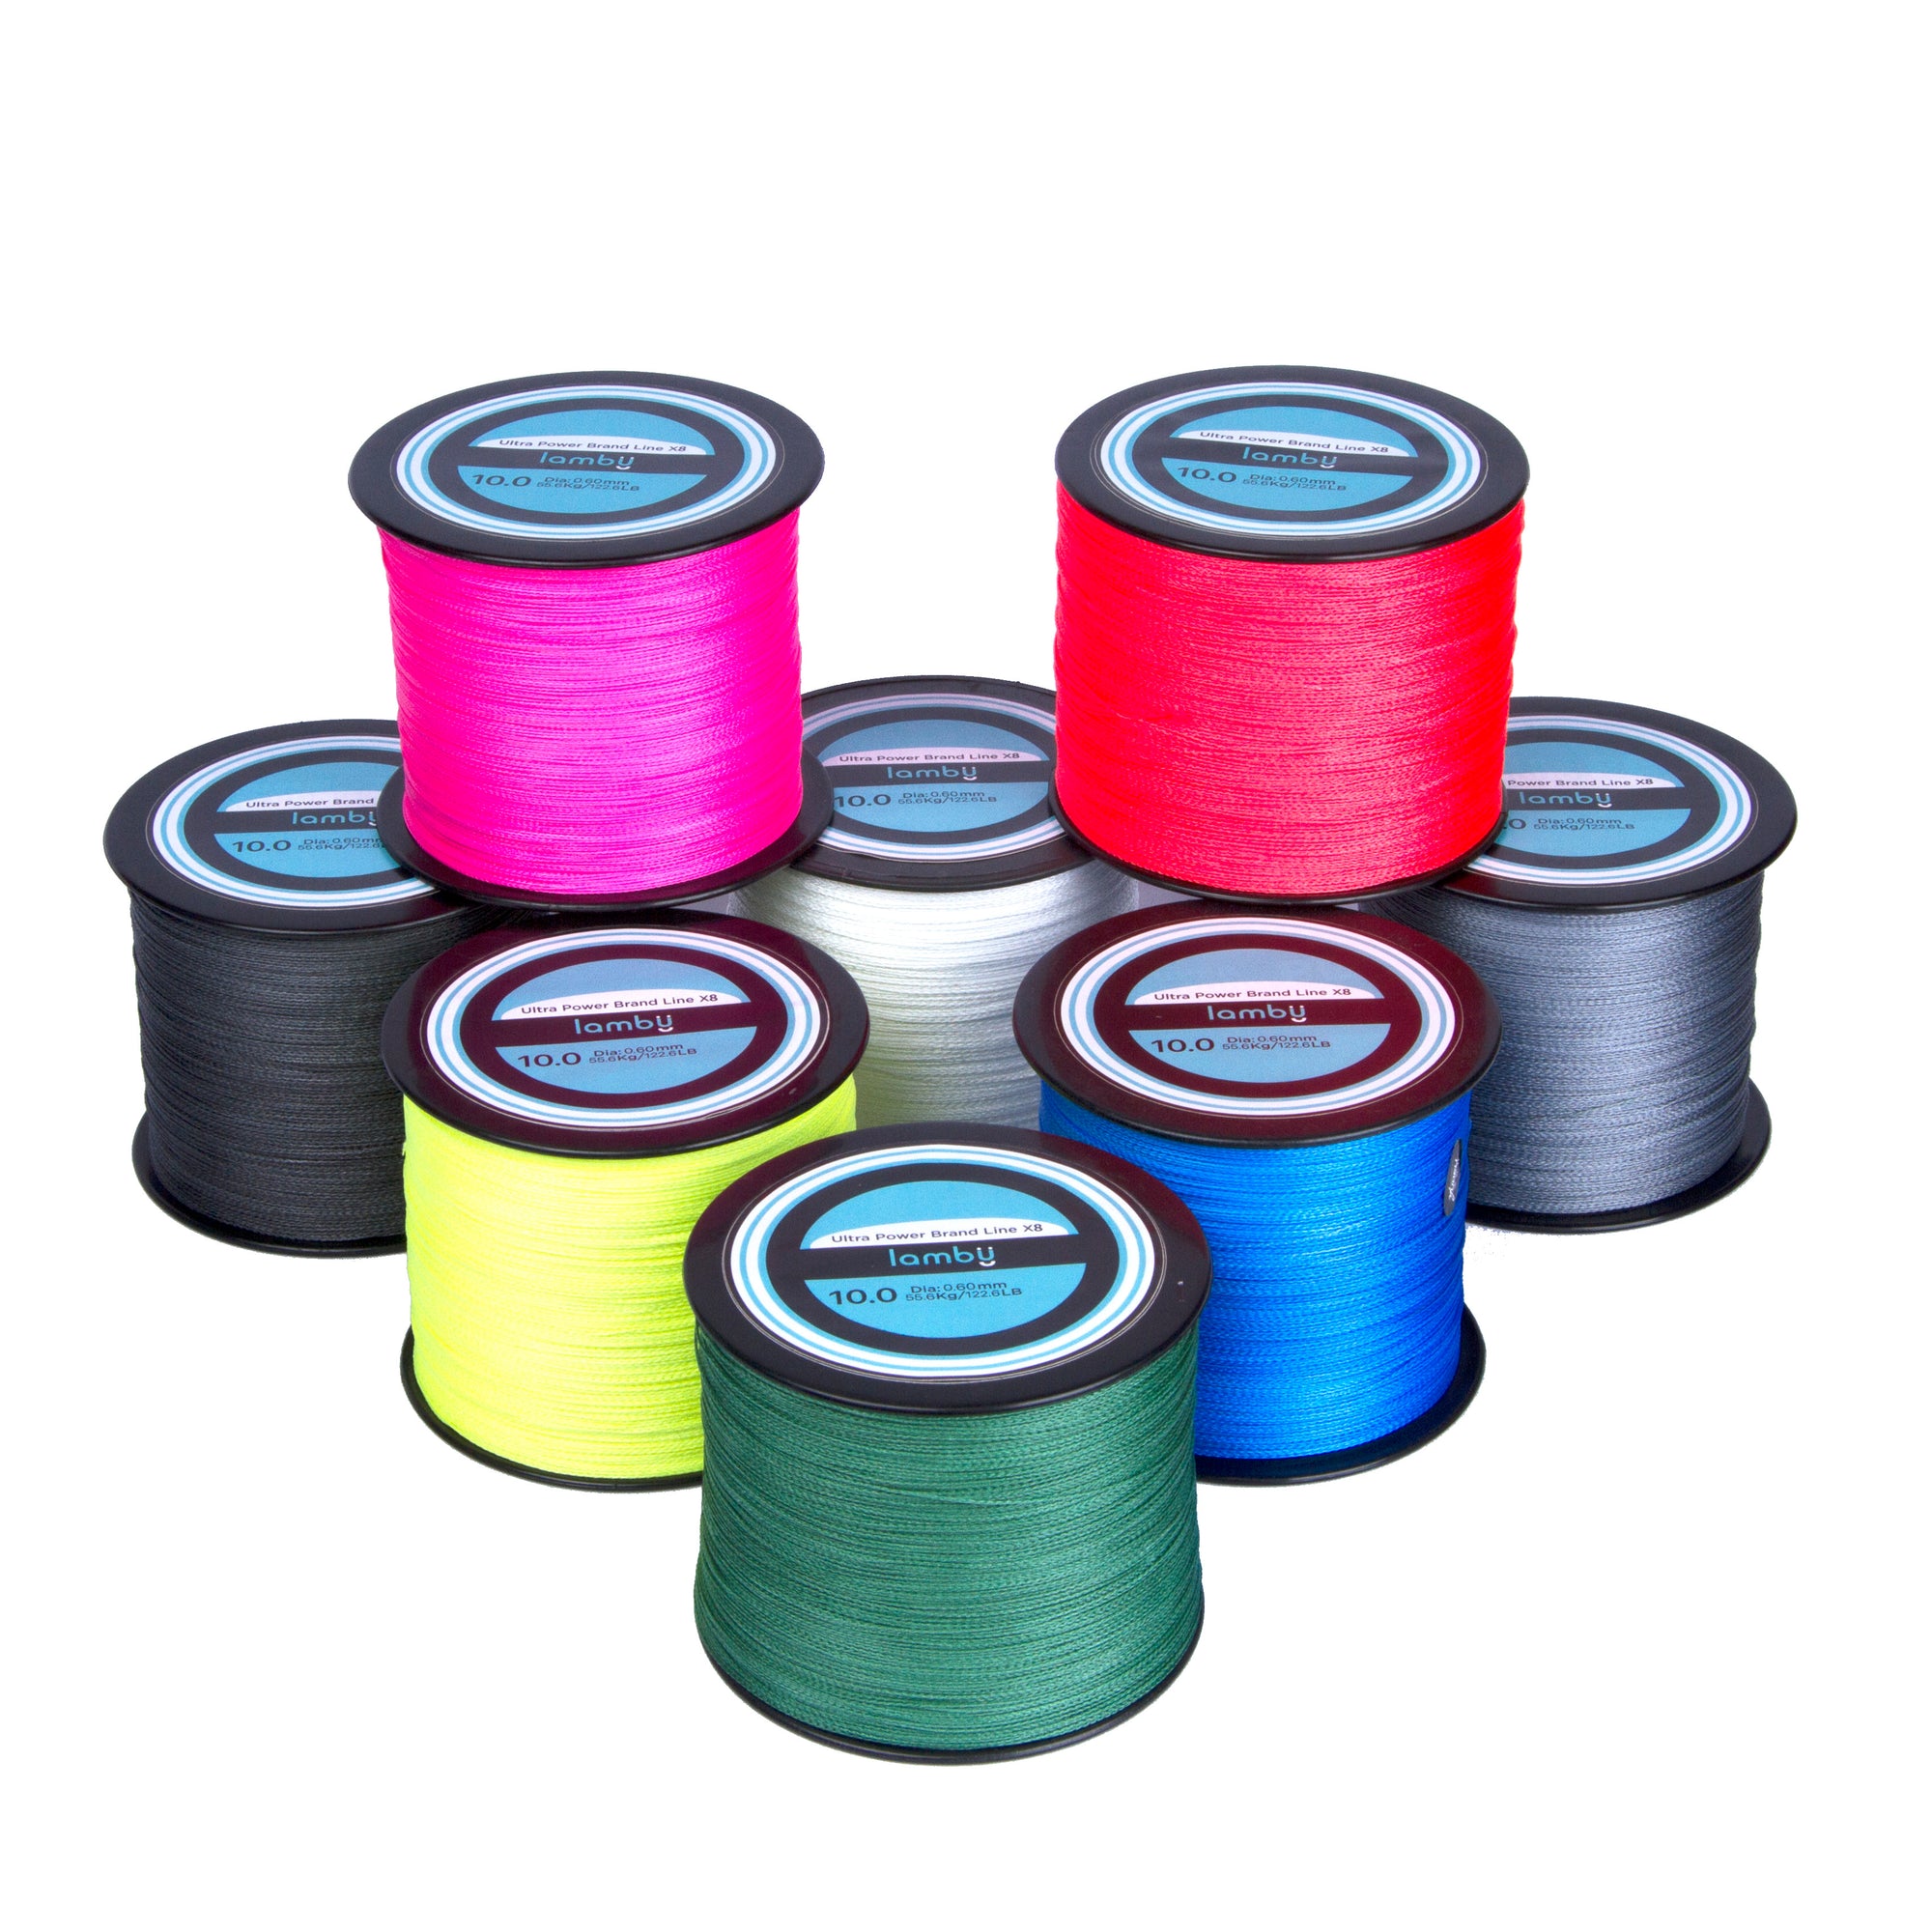 Braided fishing line Powerline Braid Power X8 Red 300 m 14/100 - 26 lbs -  Nootica - Water addicts, like you!